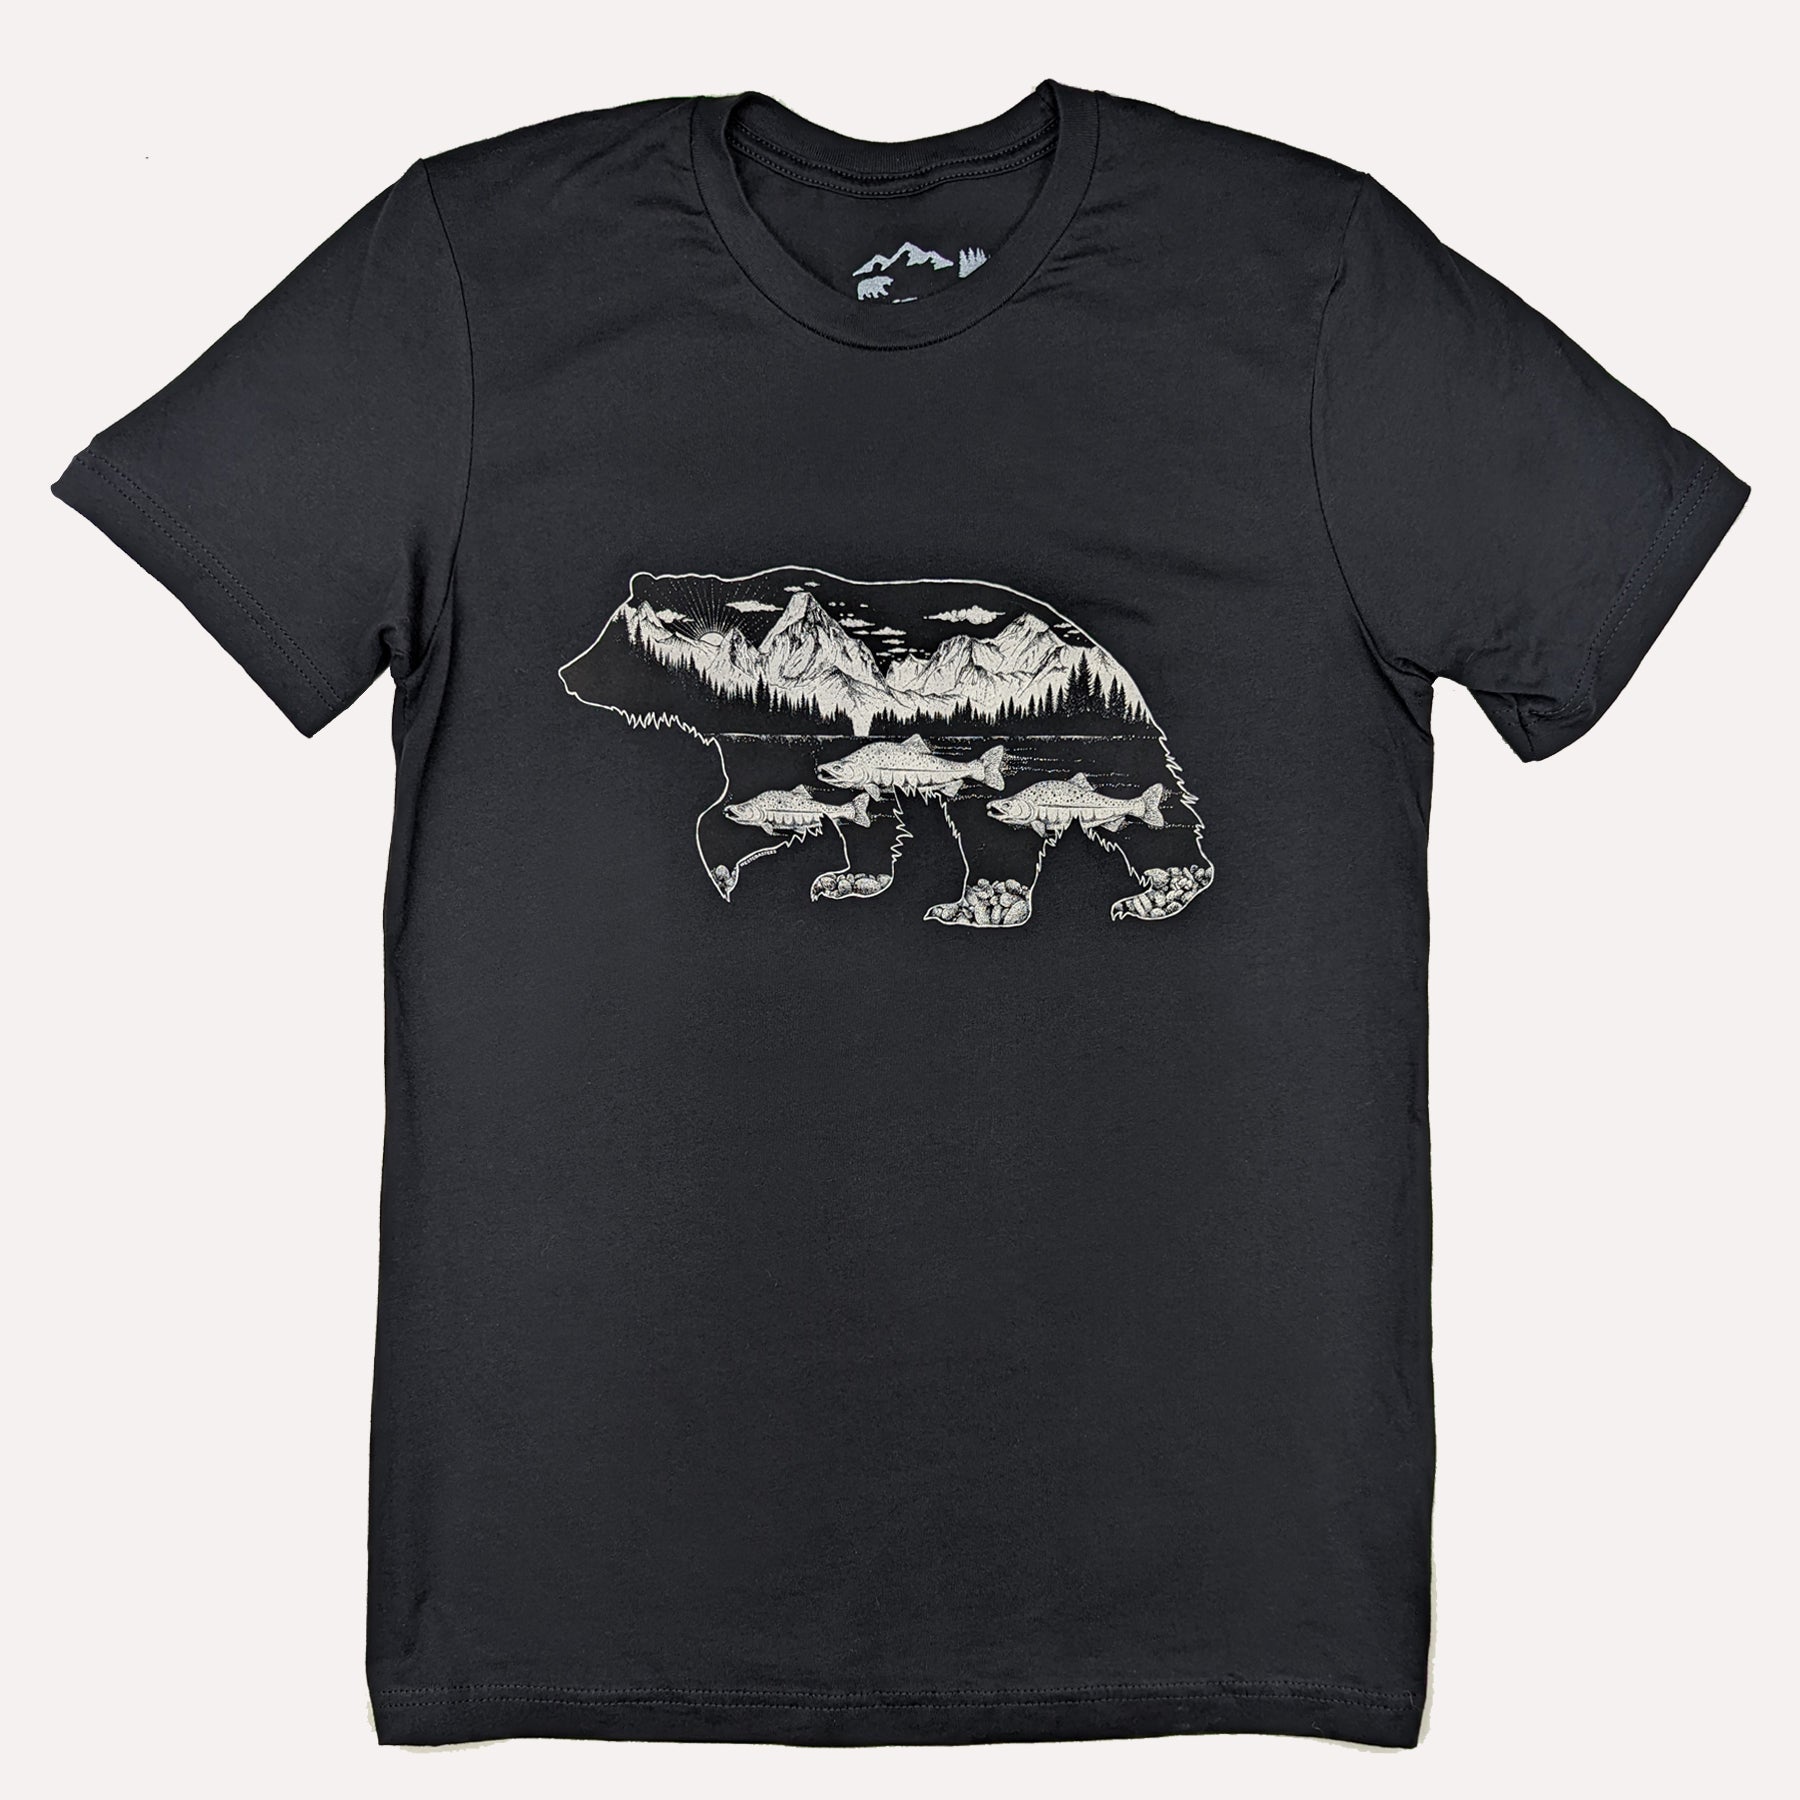 Westcoastees Adult Unisex Salmon Bear Graphic Tee - Westcoastees Adult Unisex Salmon Bear Graphic Tee -  - House of Himwitsa Native Art Gallery and Gifts